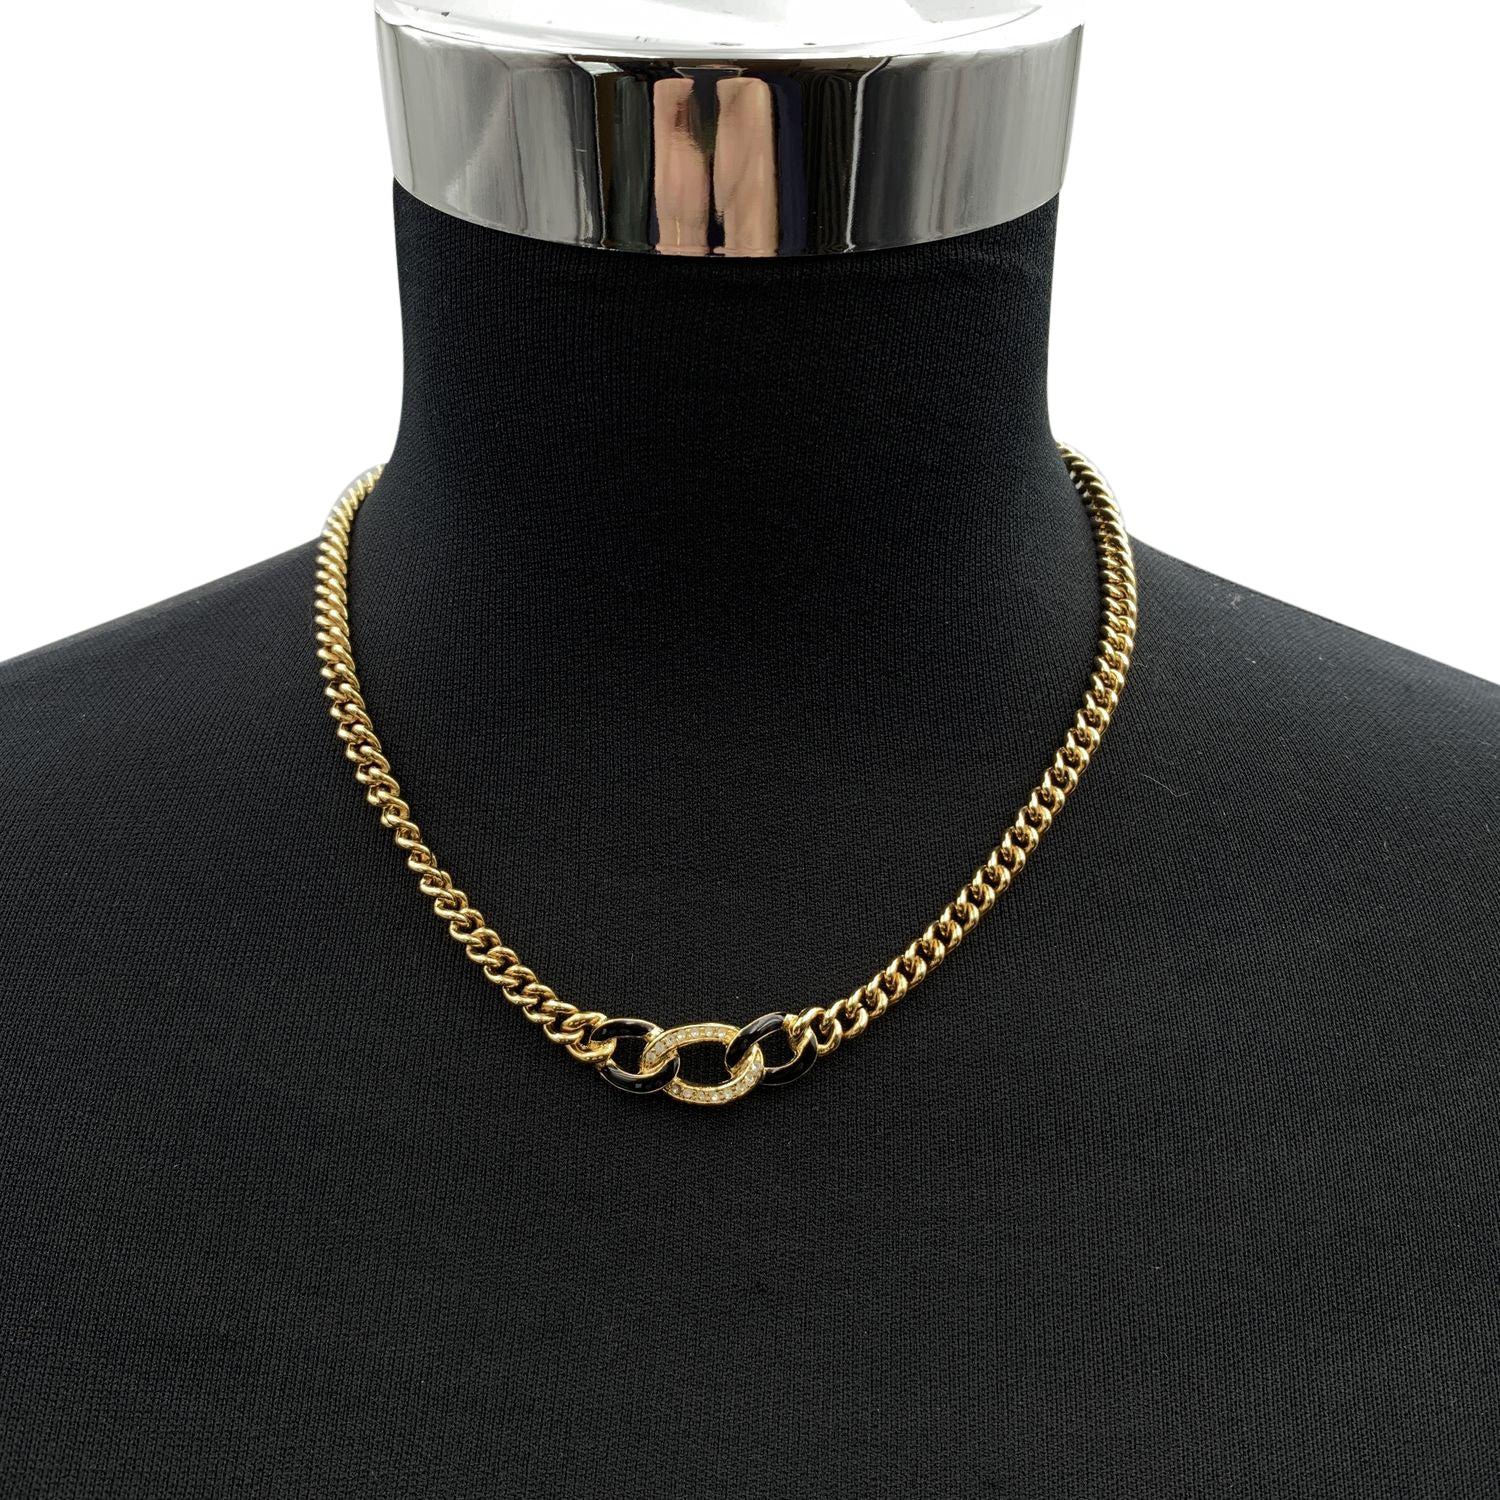 Christian Dior gold metal necklace with black enameled and crystals Interlock chain links. Marked 'Chr.Dior'. on the closure Max chain length: about 17 inches - 43.2 cm. Condition A - EXCELLENT Gently used. Please, look carefully at the photos and